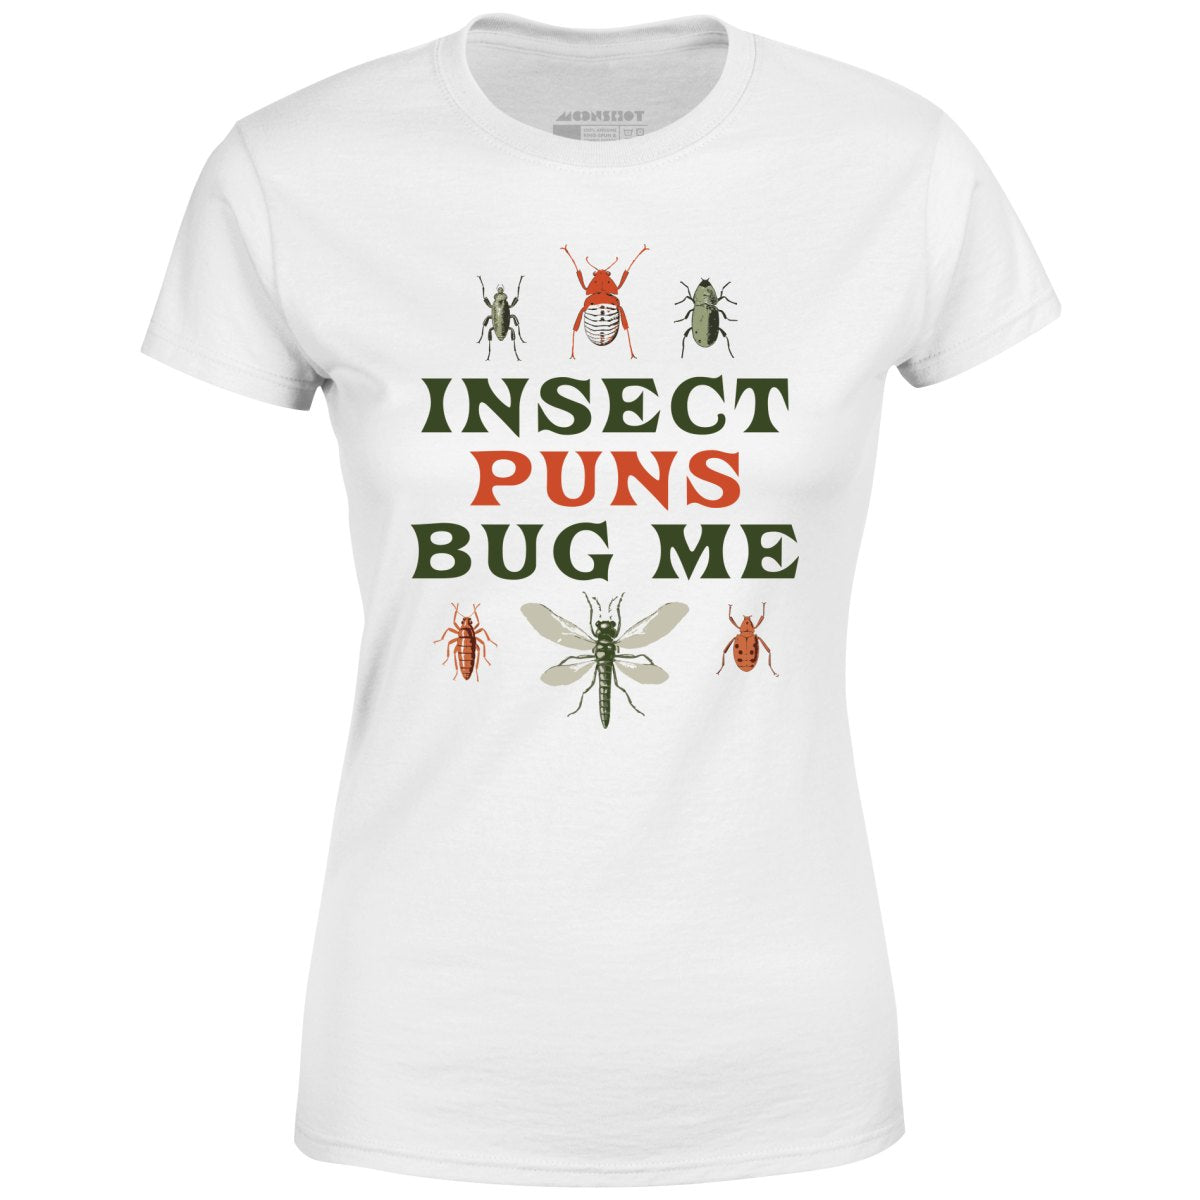 Insect Puns Bug Me - Women's T-Shirt